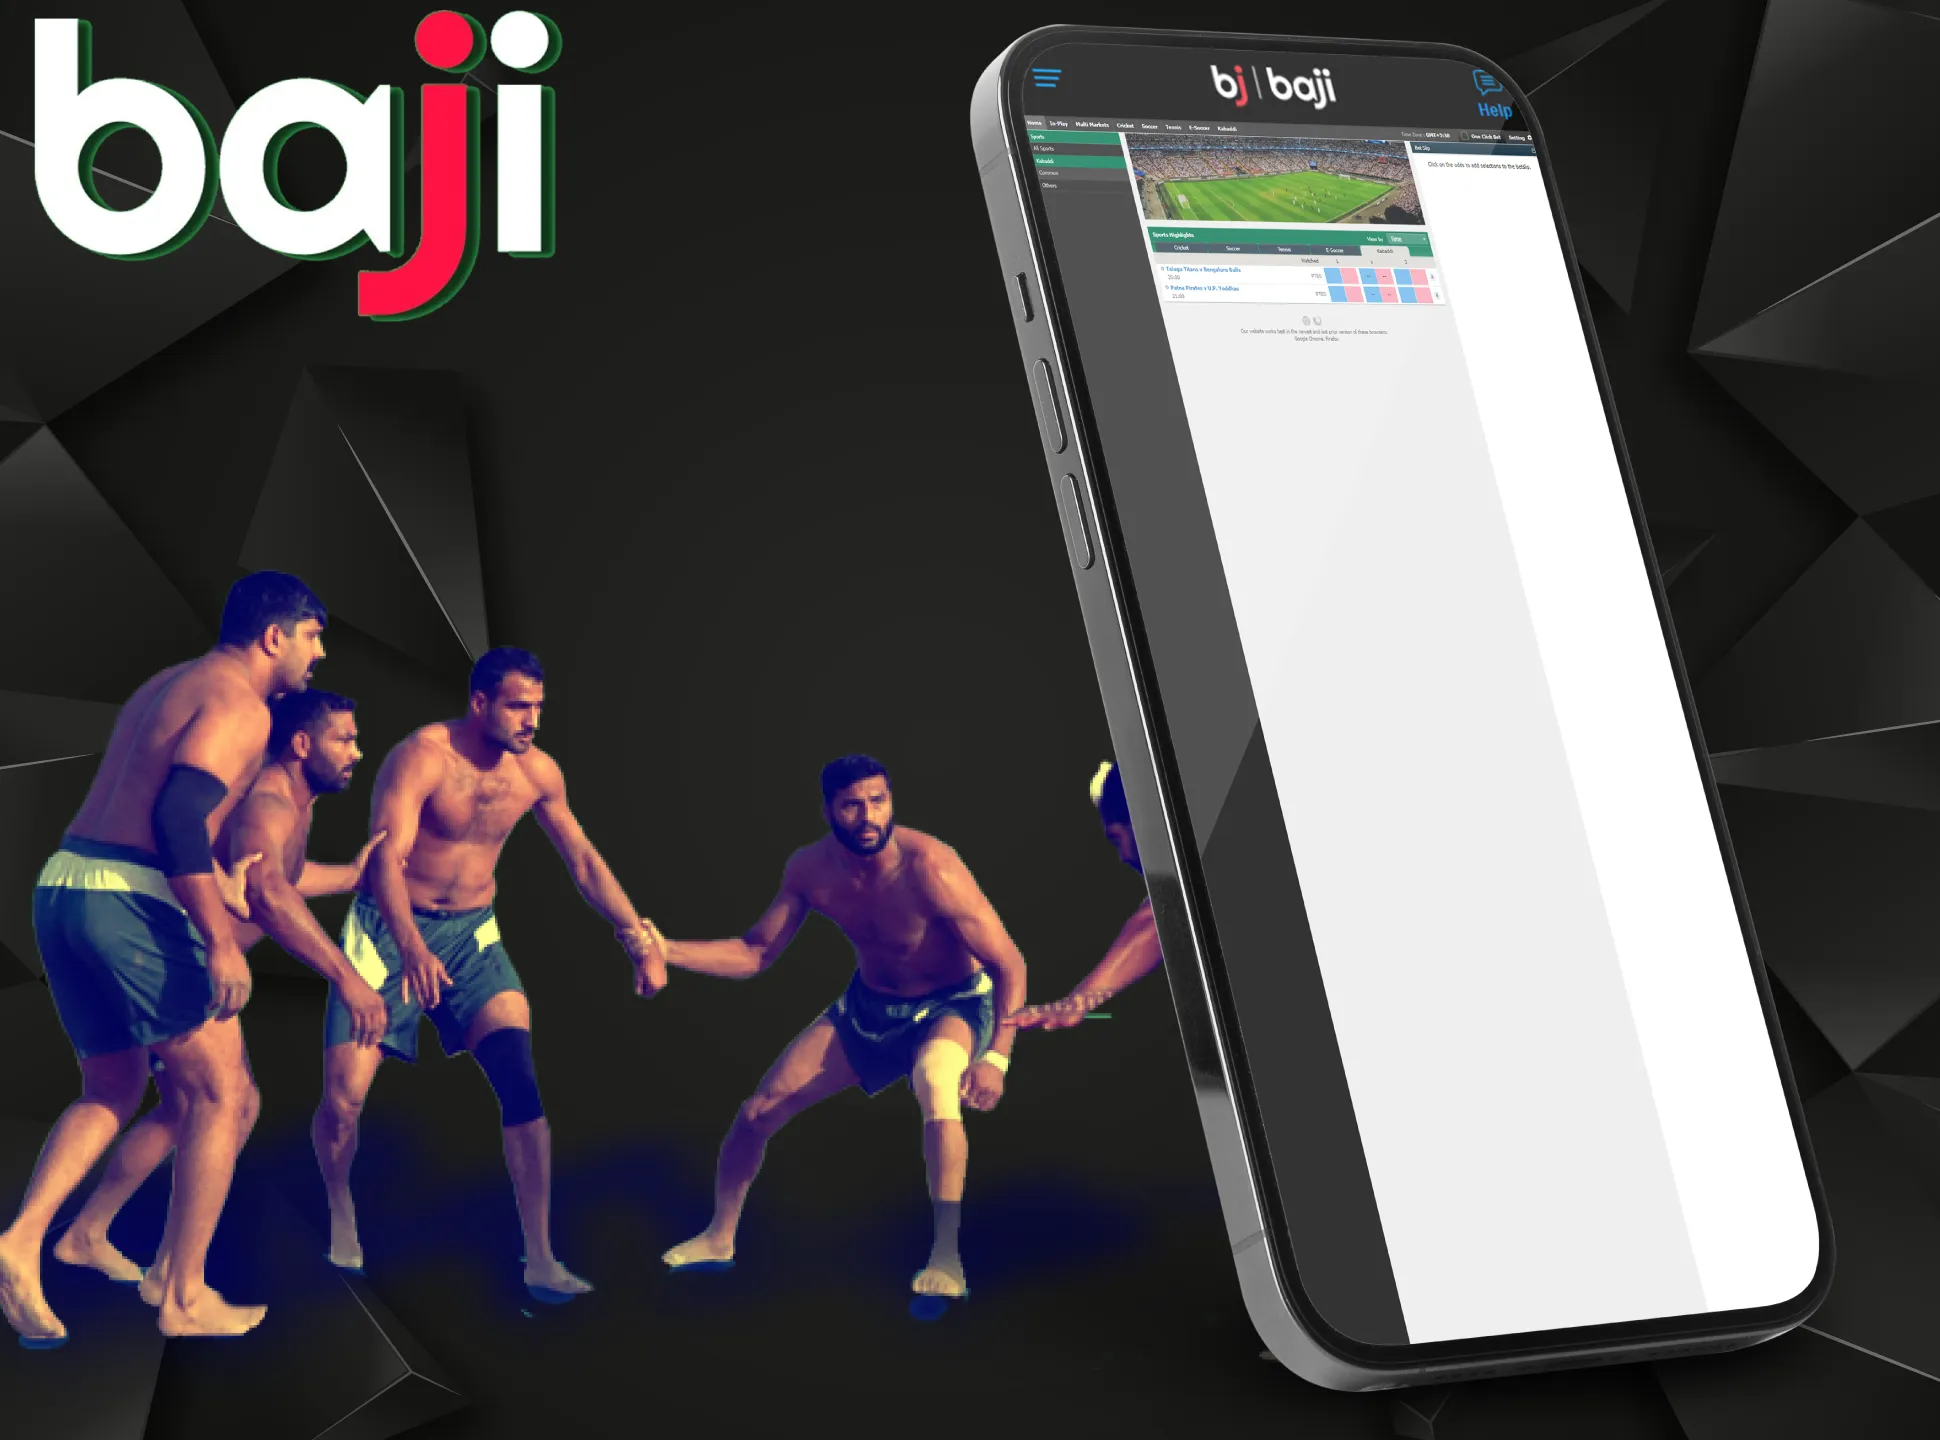 Place bets on the kabaddi matches in the Baji app.